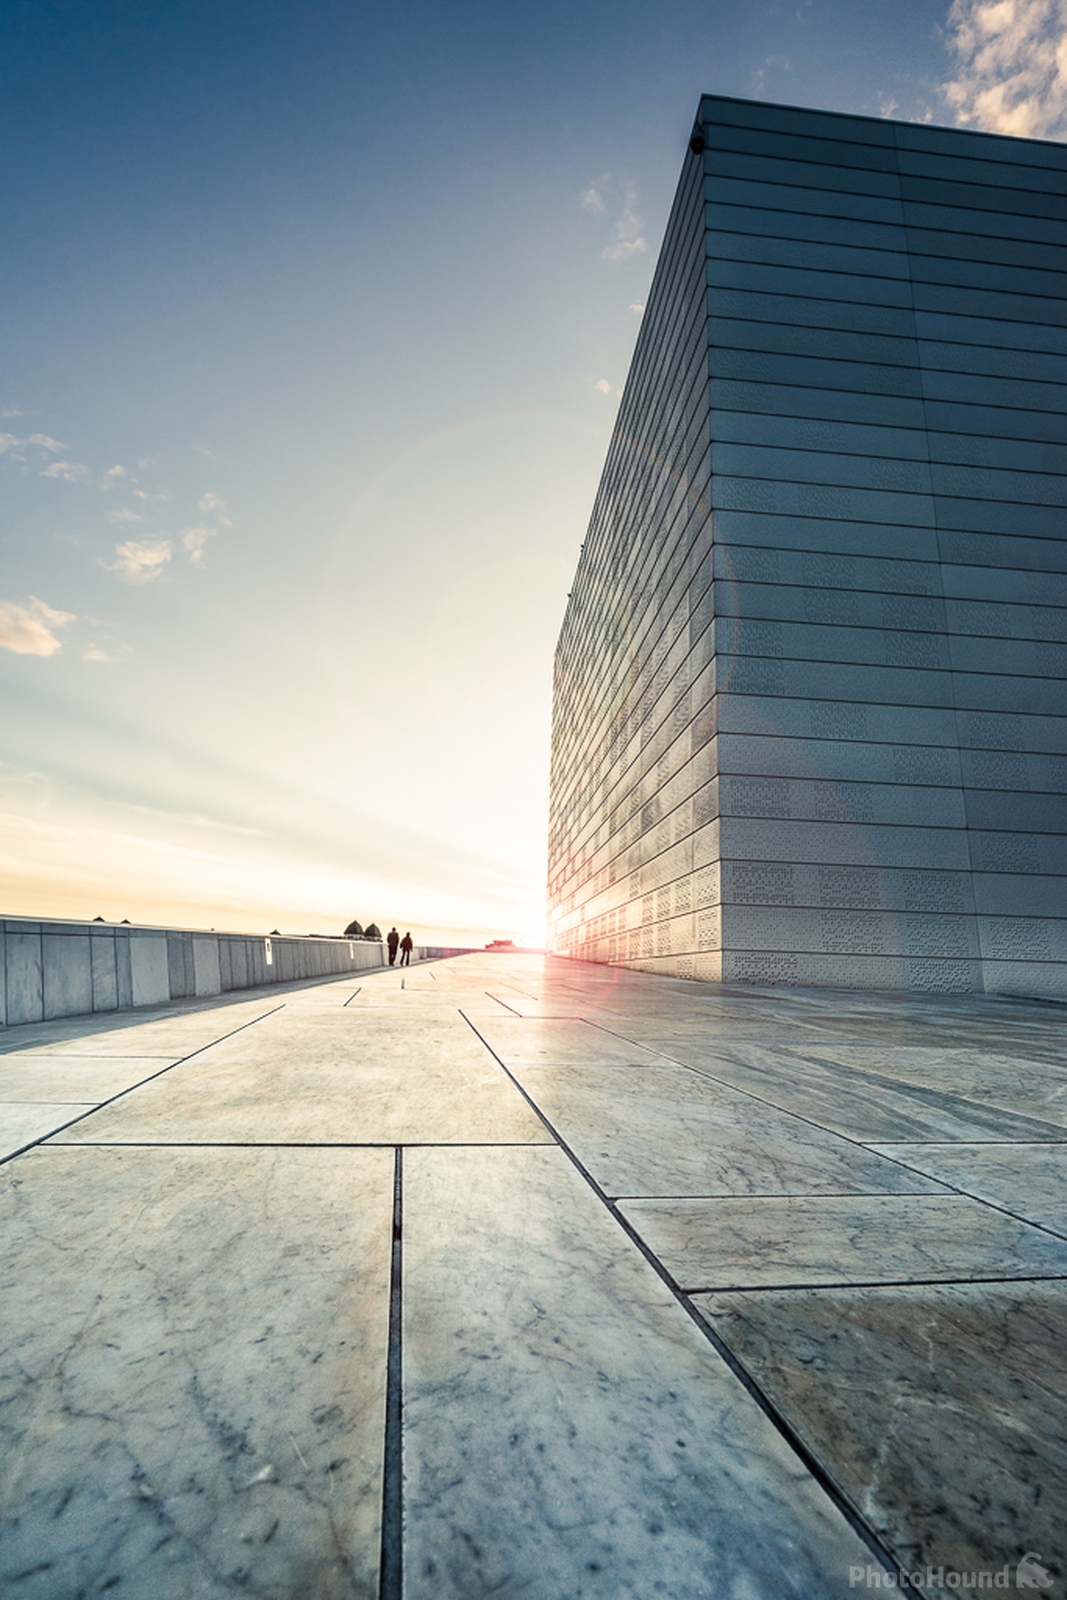 Image of Oslo Opera House - Exterior by James Billings.